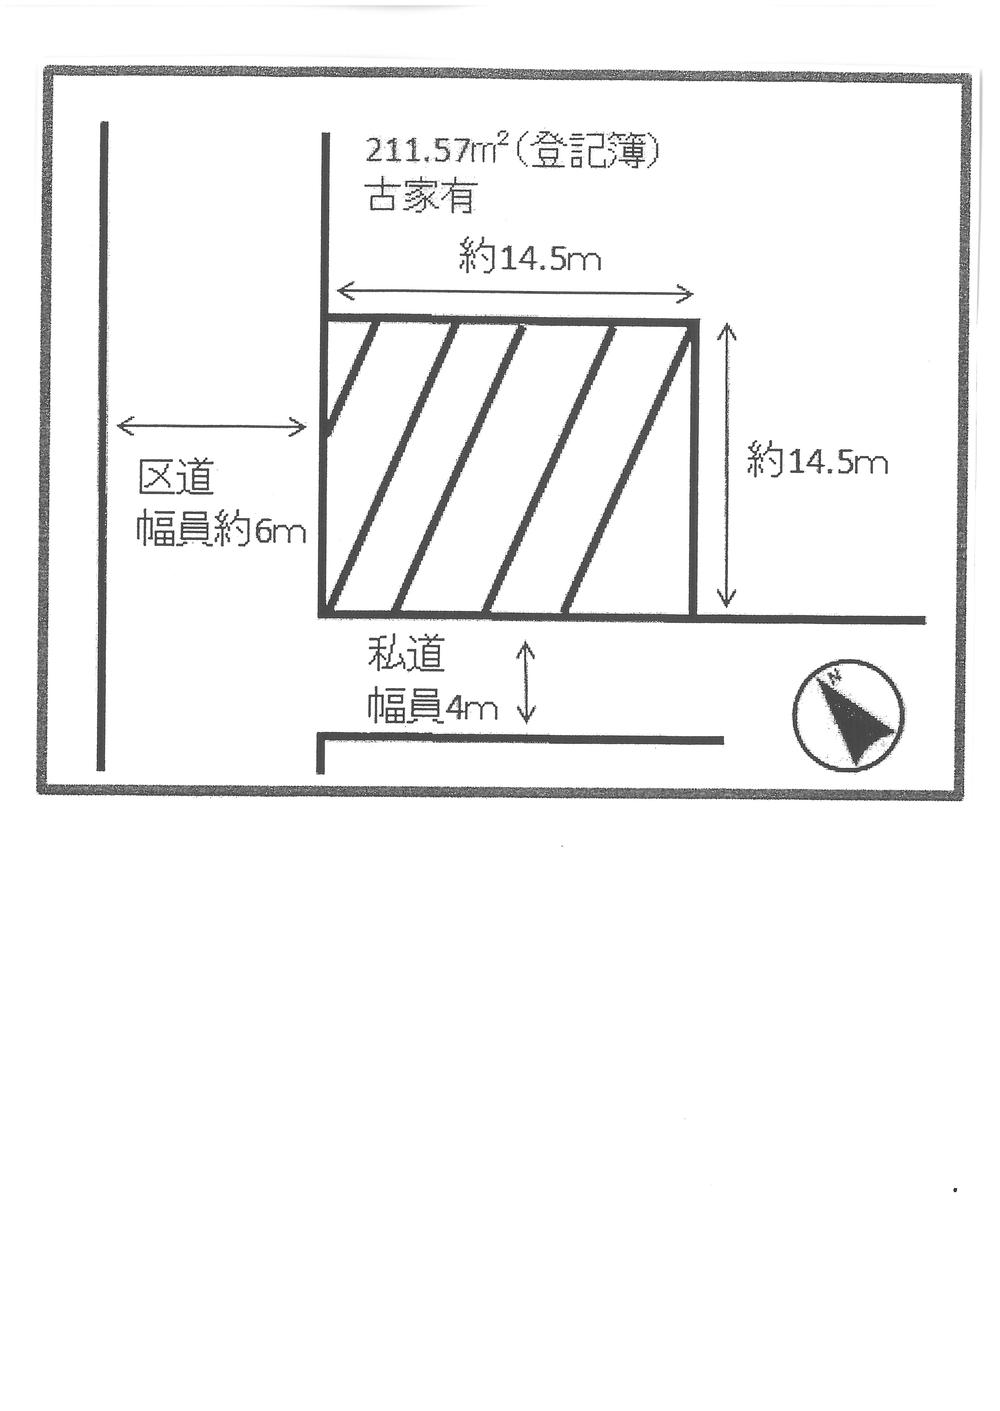 Compartment figure. Land price 109 million yen, Land area 211.57 sq m southwest side of the road ・ Corner lot ・ Shaping land and favorable conditions have aligned. 